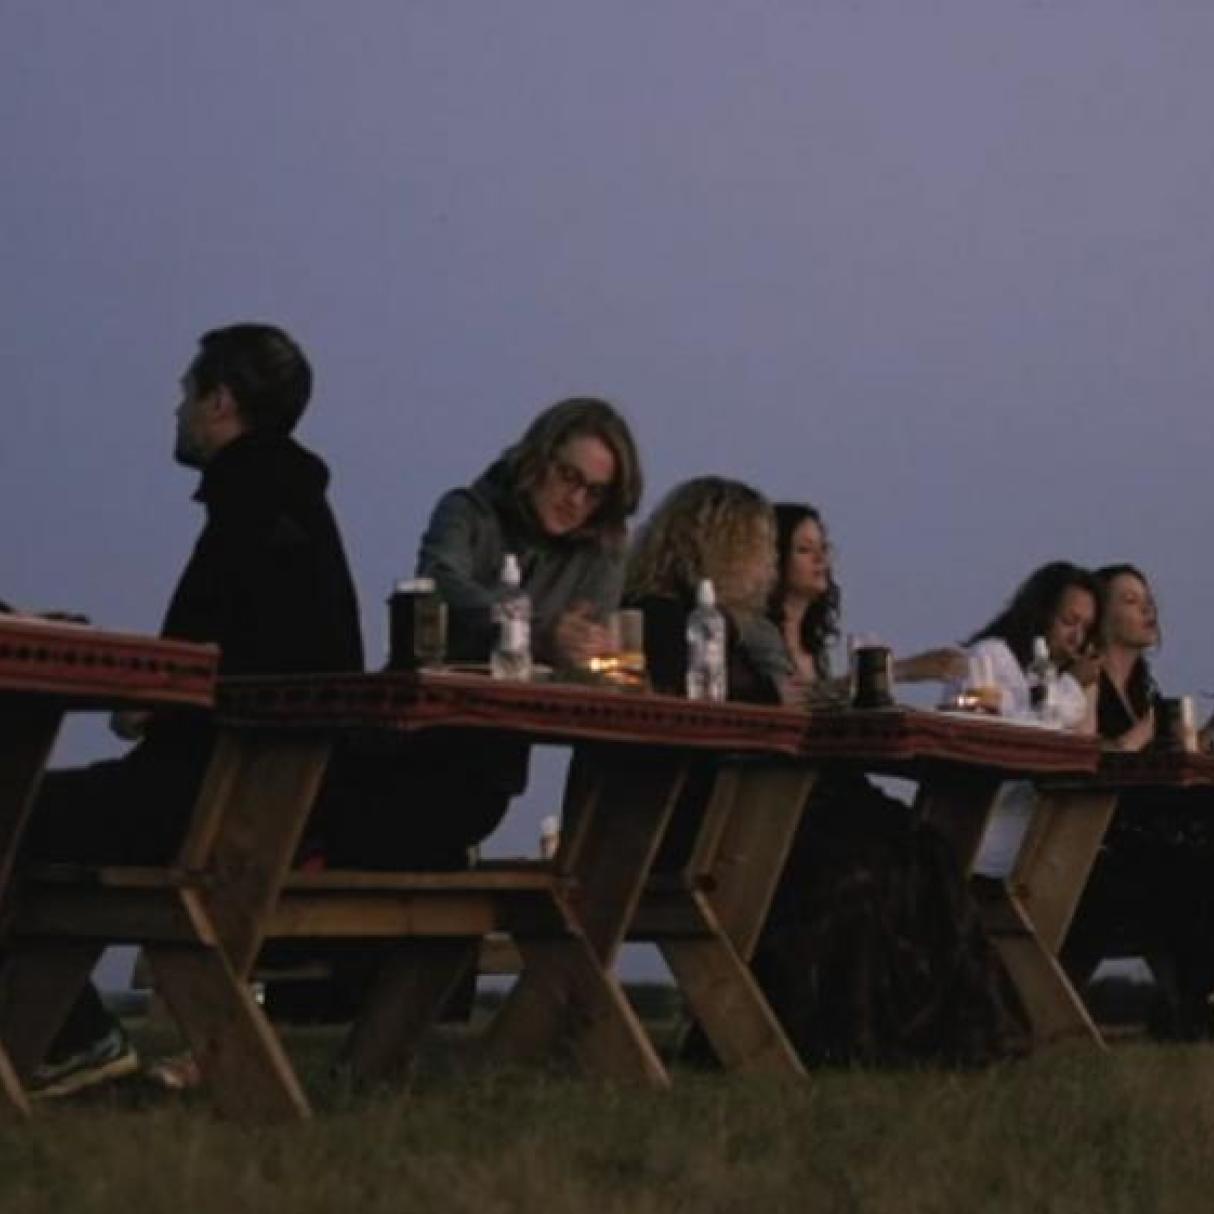 People eating an outdoor dinner at dusk